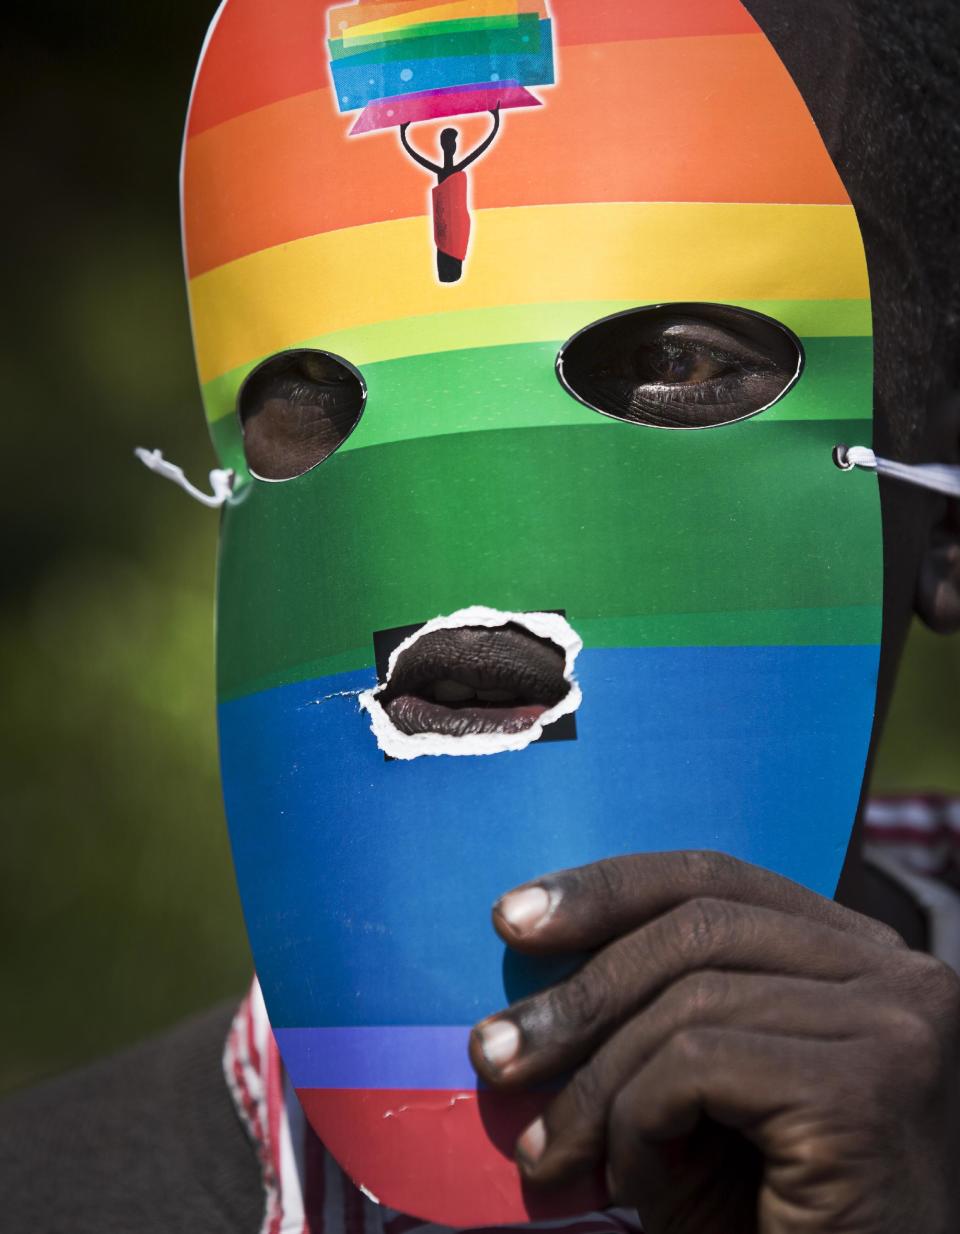 Kenyan gays and lesbians and others supporting their cause wear masks to preserve their anonymity as they stage a rare protest, against Uganda's increasingly tough stance against homosexuality and in solidarity with their counterparts there, outside the Uganda High Commission in Nairobi, Kenya Monday, Feb. 10, 2014. Homosexuality has been criminalized in Uganda where lawmakers have recently passed a new bill, which appears to have wide support among Ugandans, that prescribes life imprisonment for "aggravated" homosexual acts. (AP Photo/Ben Curtis)